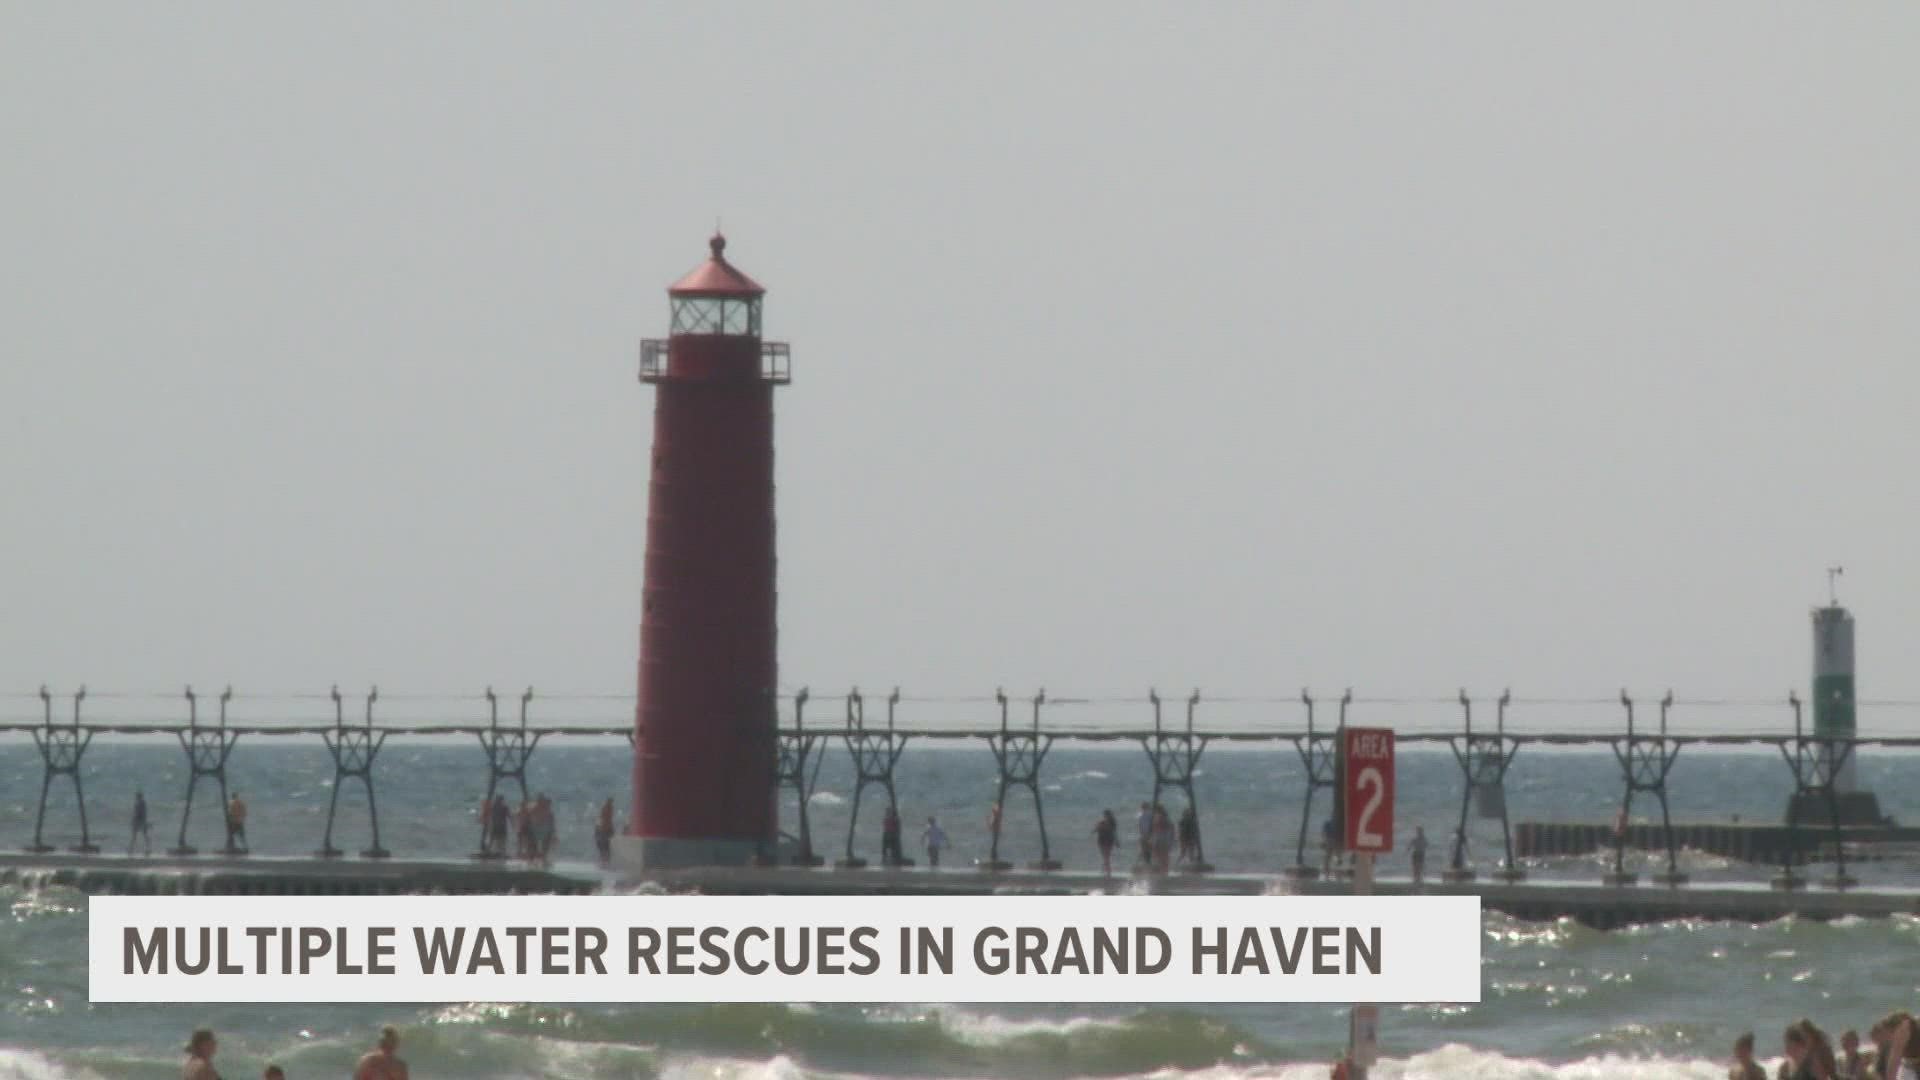 The Grand Haven Department of Public Safety rescued three swimmers in distress at Grand Haven State Park. Water access at the beach is now closed.